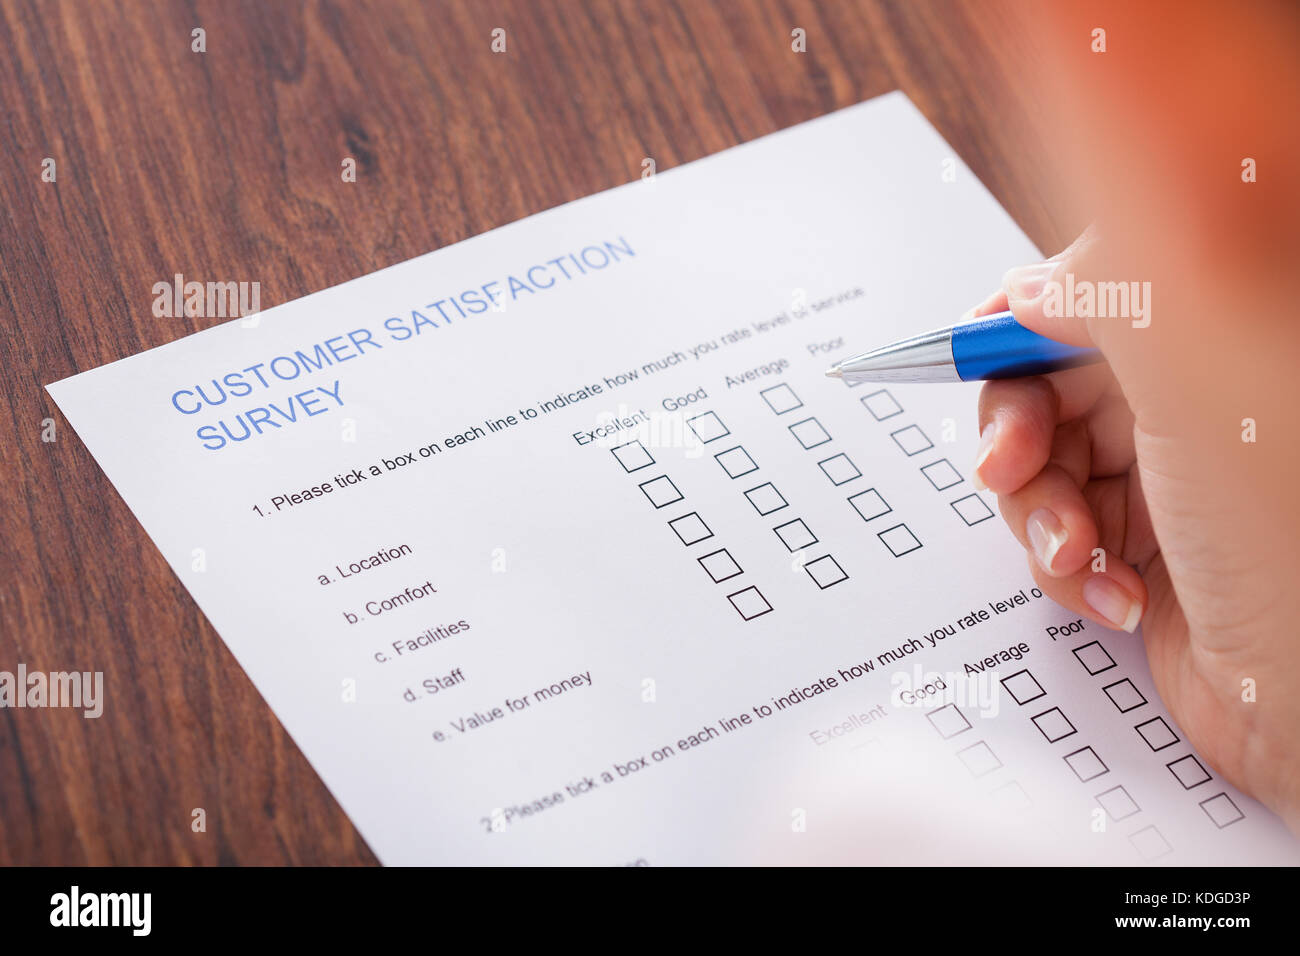 Close-up Of Hand Holding Pen Over Survey Form Stock Photo